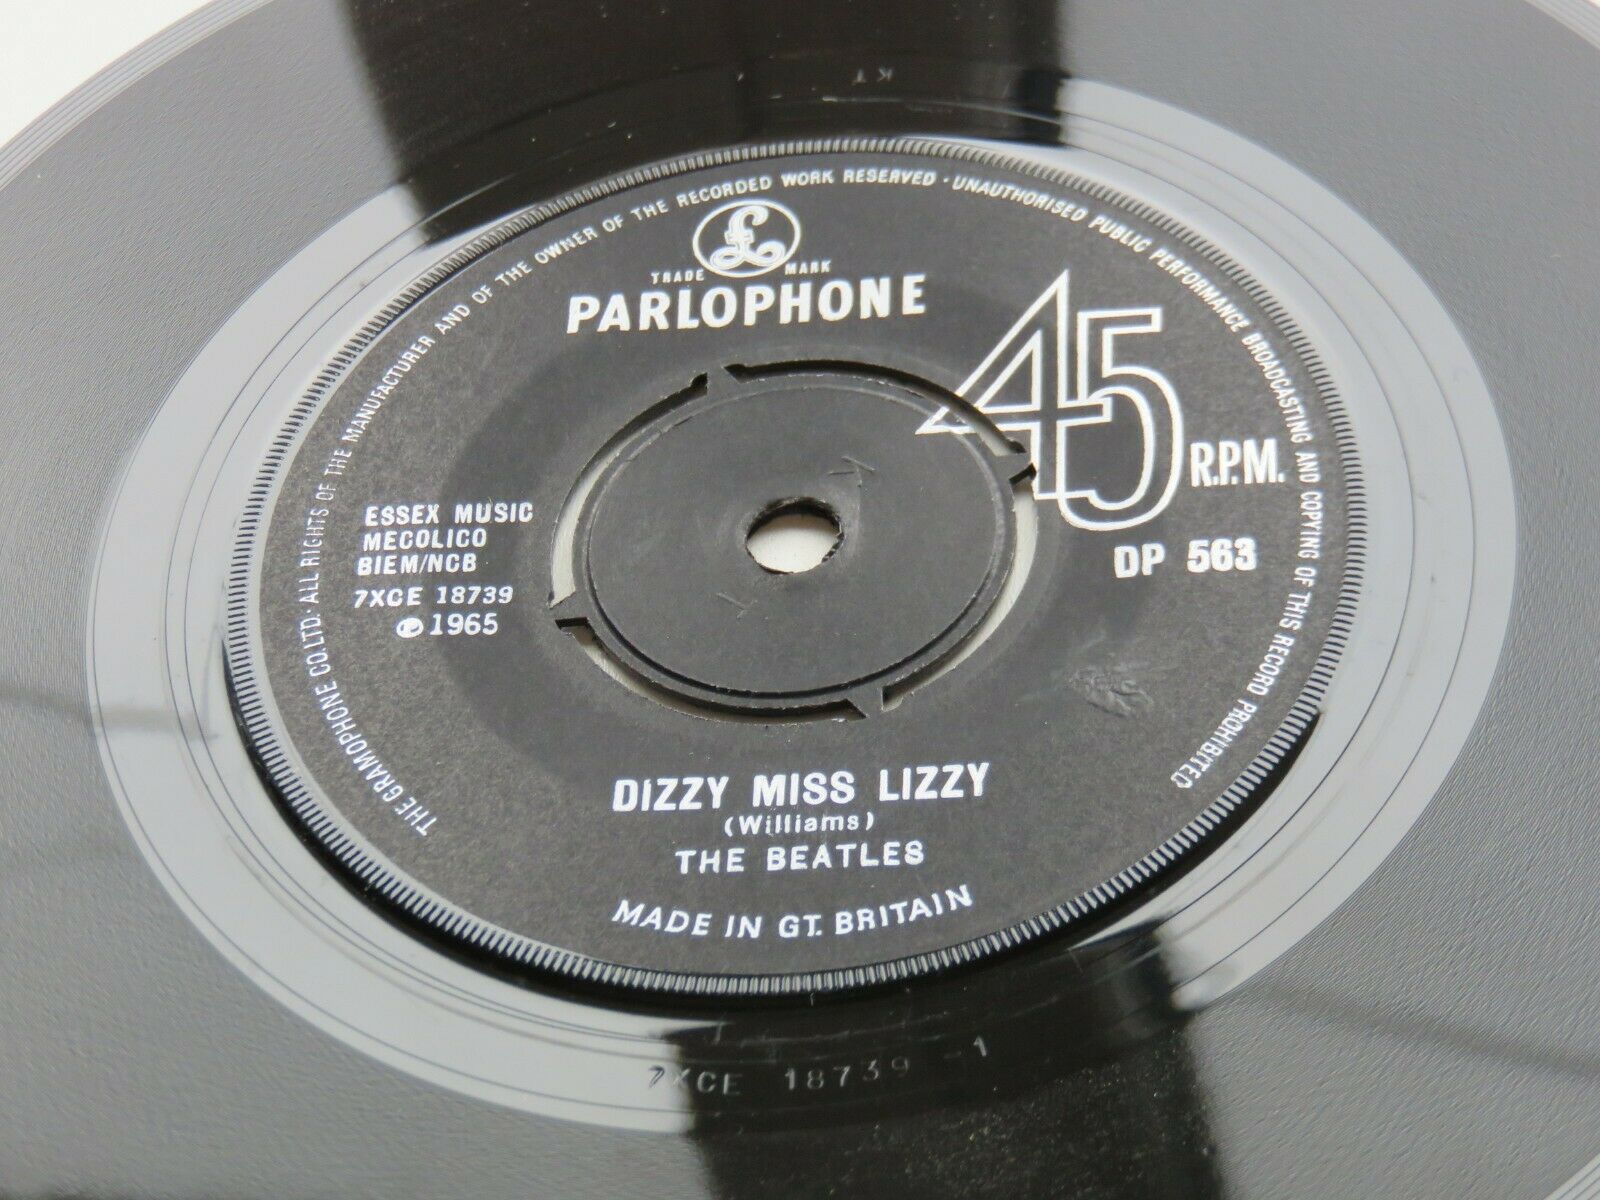 Pic 4 THE BEATLES 1965 EXPORT 45  YESTERDAY  DIZZY MISS LIZZY   PARLOPHONE  DP 563 EX+